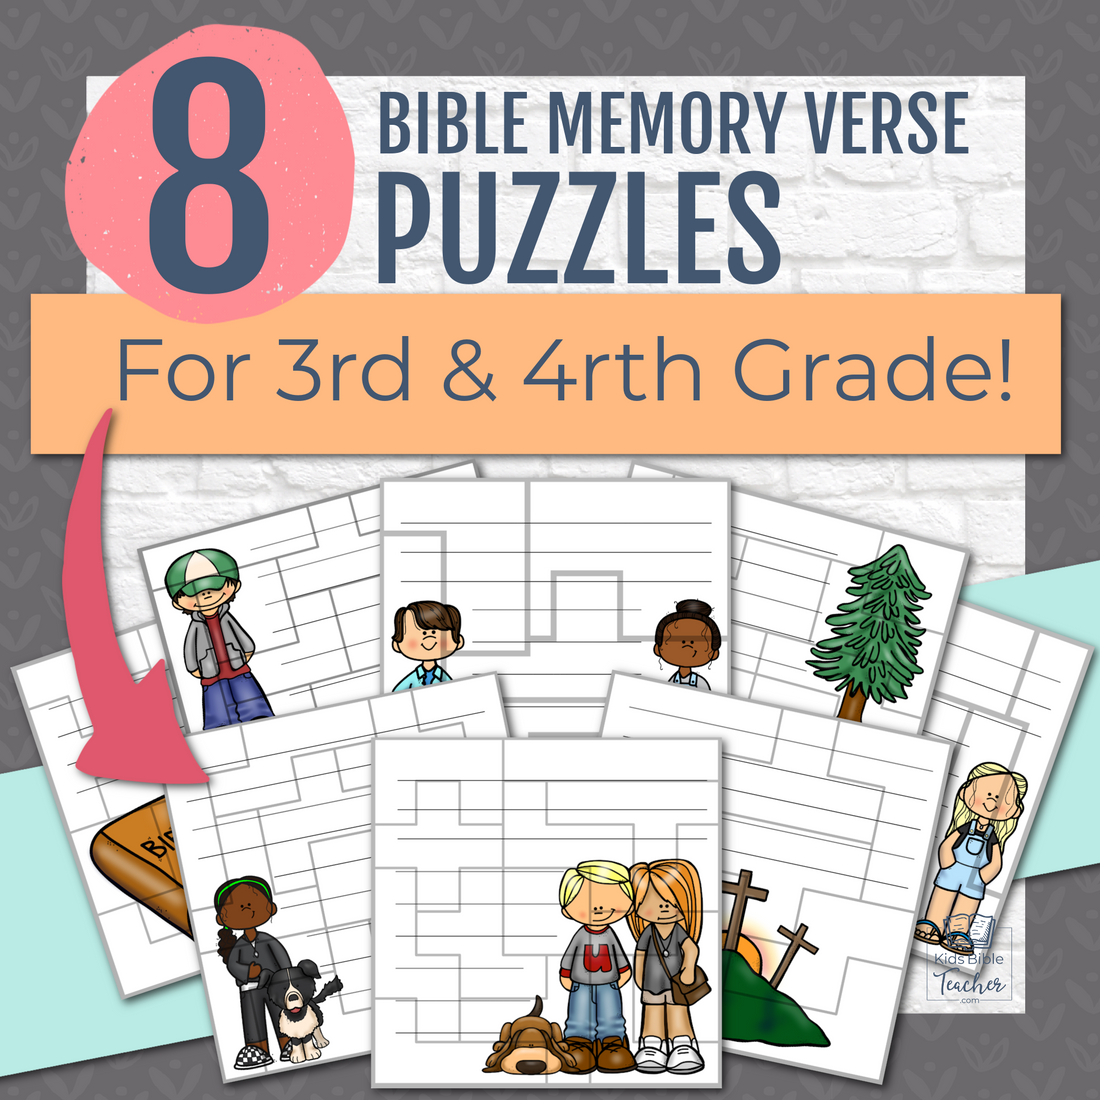 8 Bible Memory Verse Puzzles for 3rd and 4rth Graders